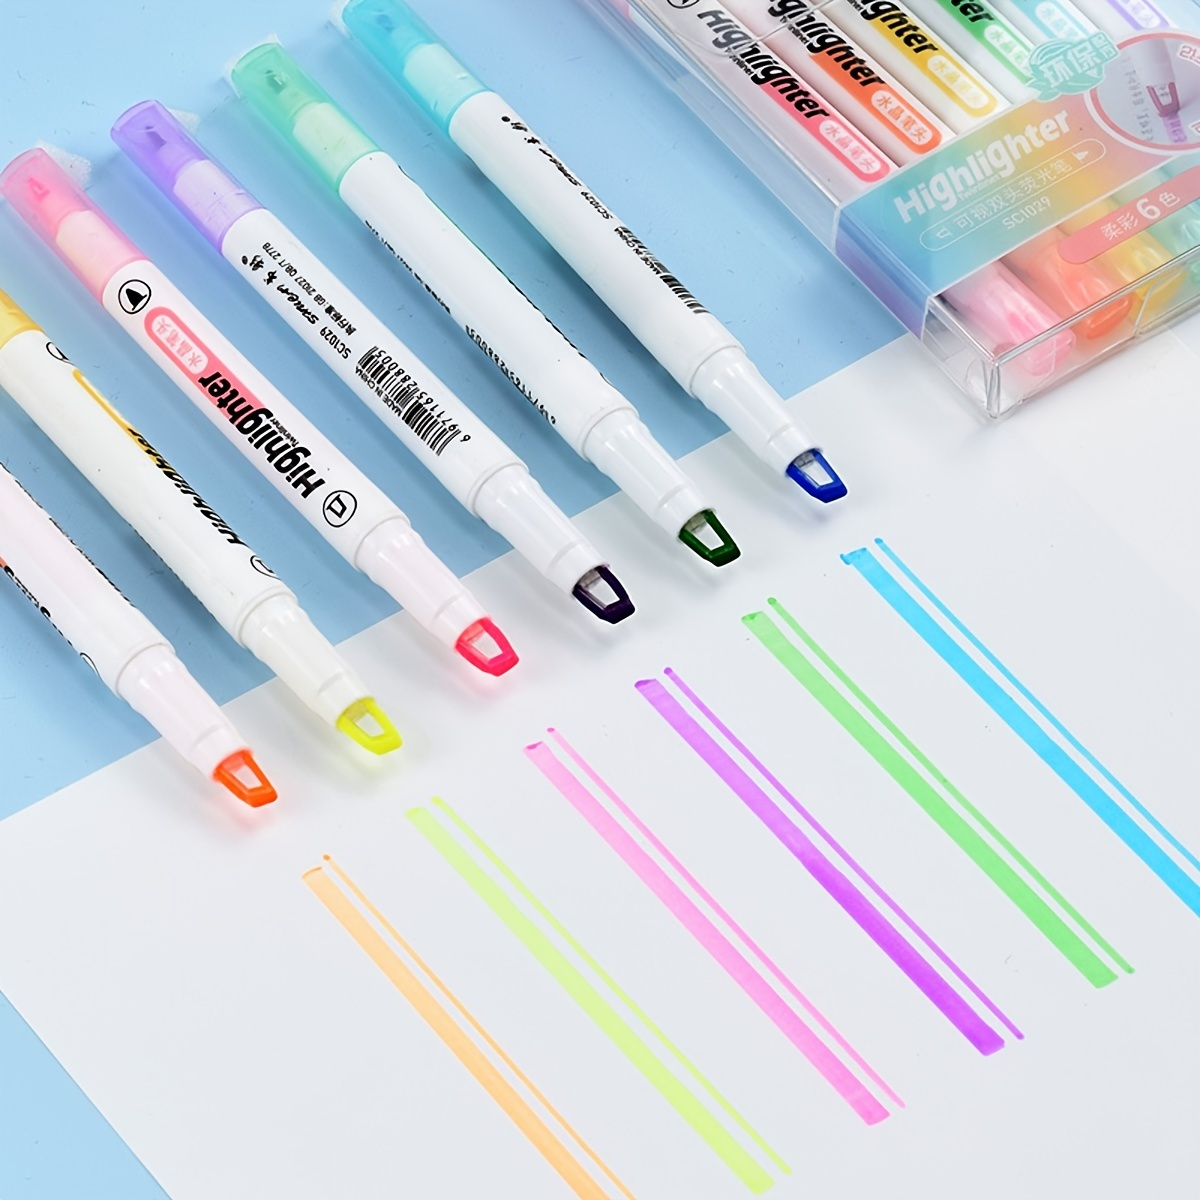 https://img.kwcdn.com/product/haile-double-tip-highlighter-pens-macaron-color-manga-markers/d69d2f15w98k18-144c0bb4/1d18fce0000/5ec4f8e2-5fe3-4f6c-bef4-aa5312e8bfbd_1200x1200.jpeg.a.jpeg